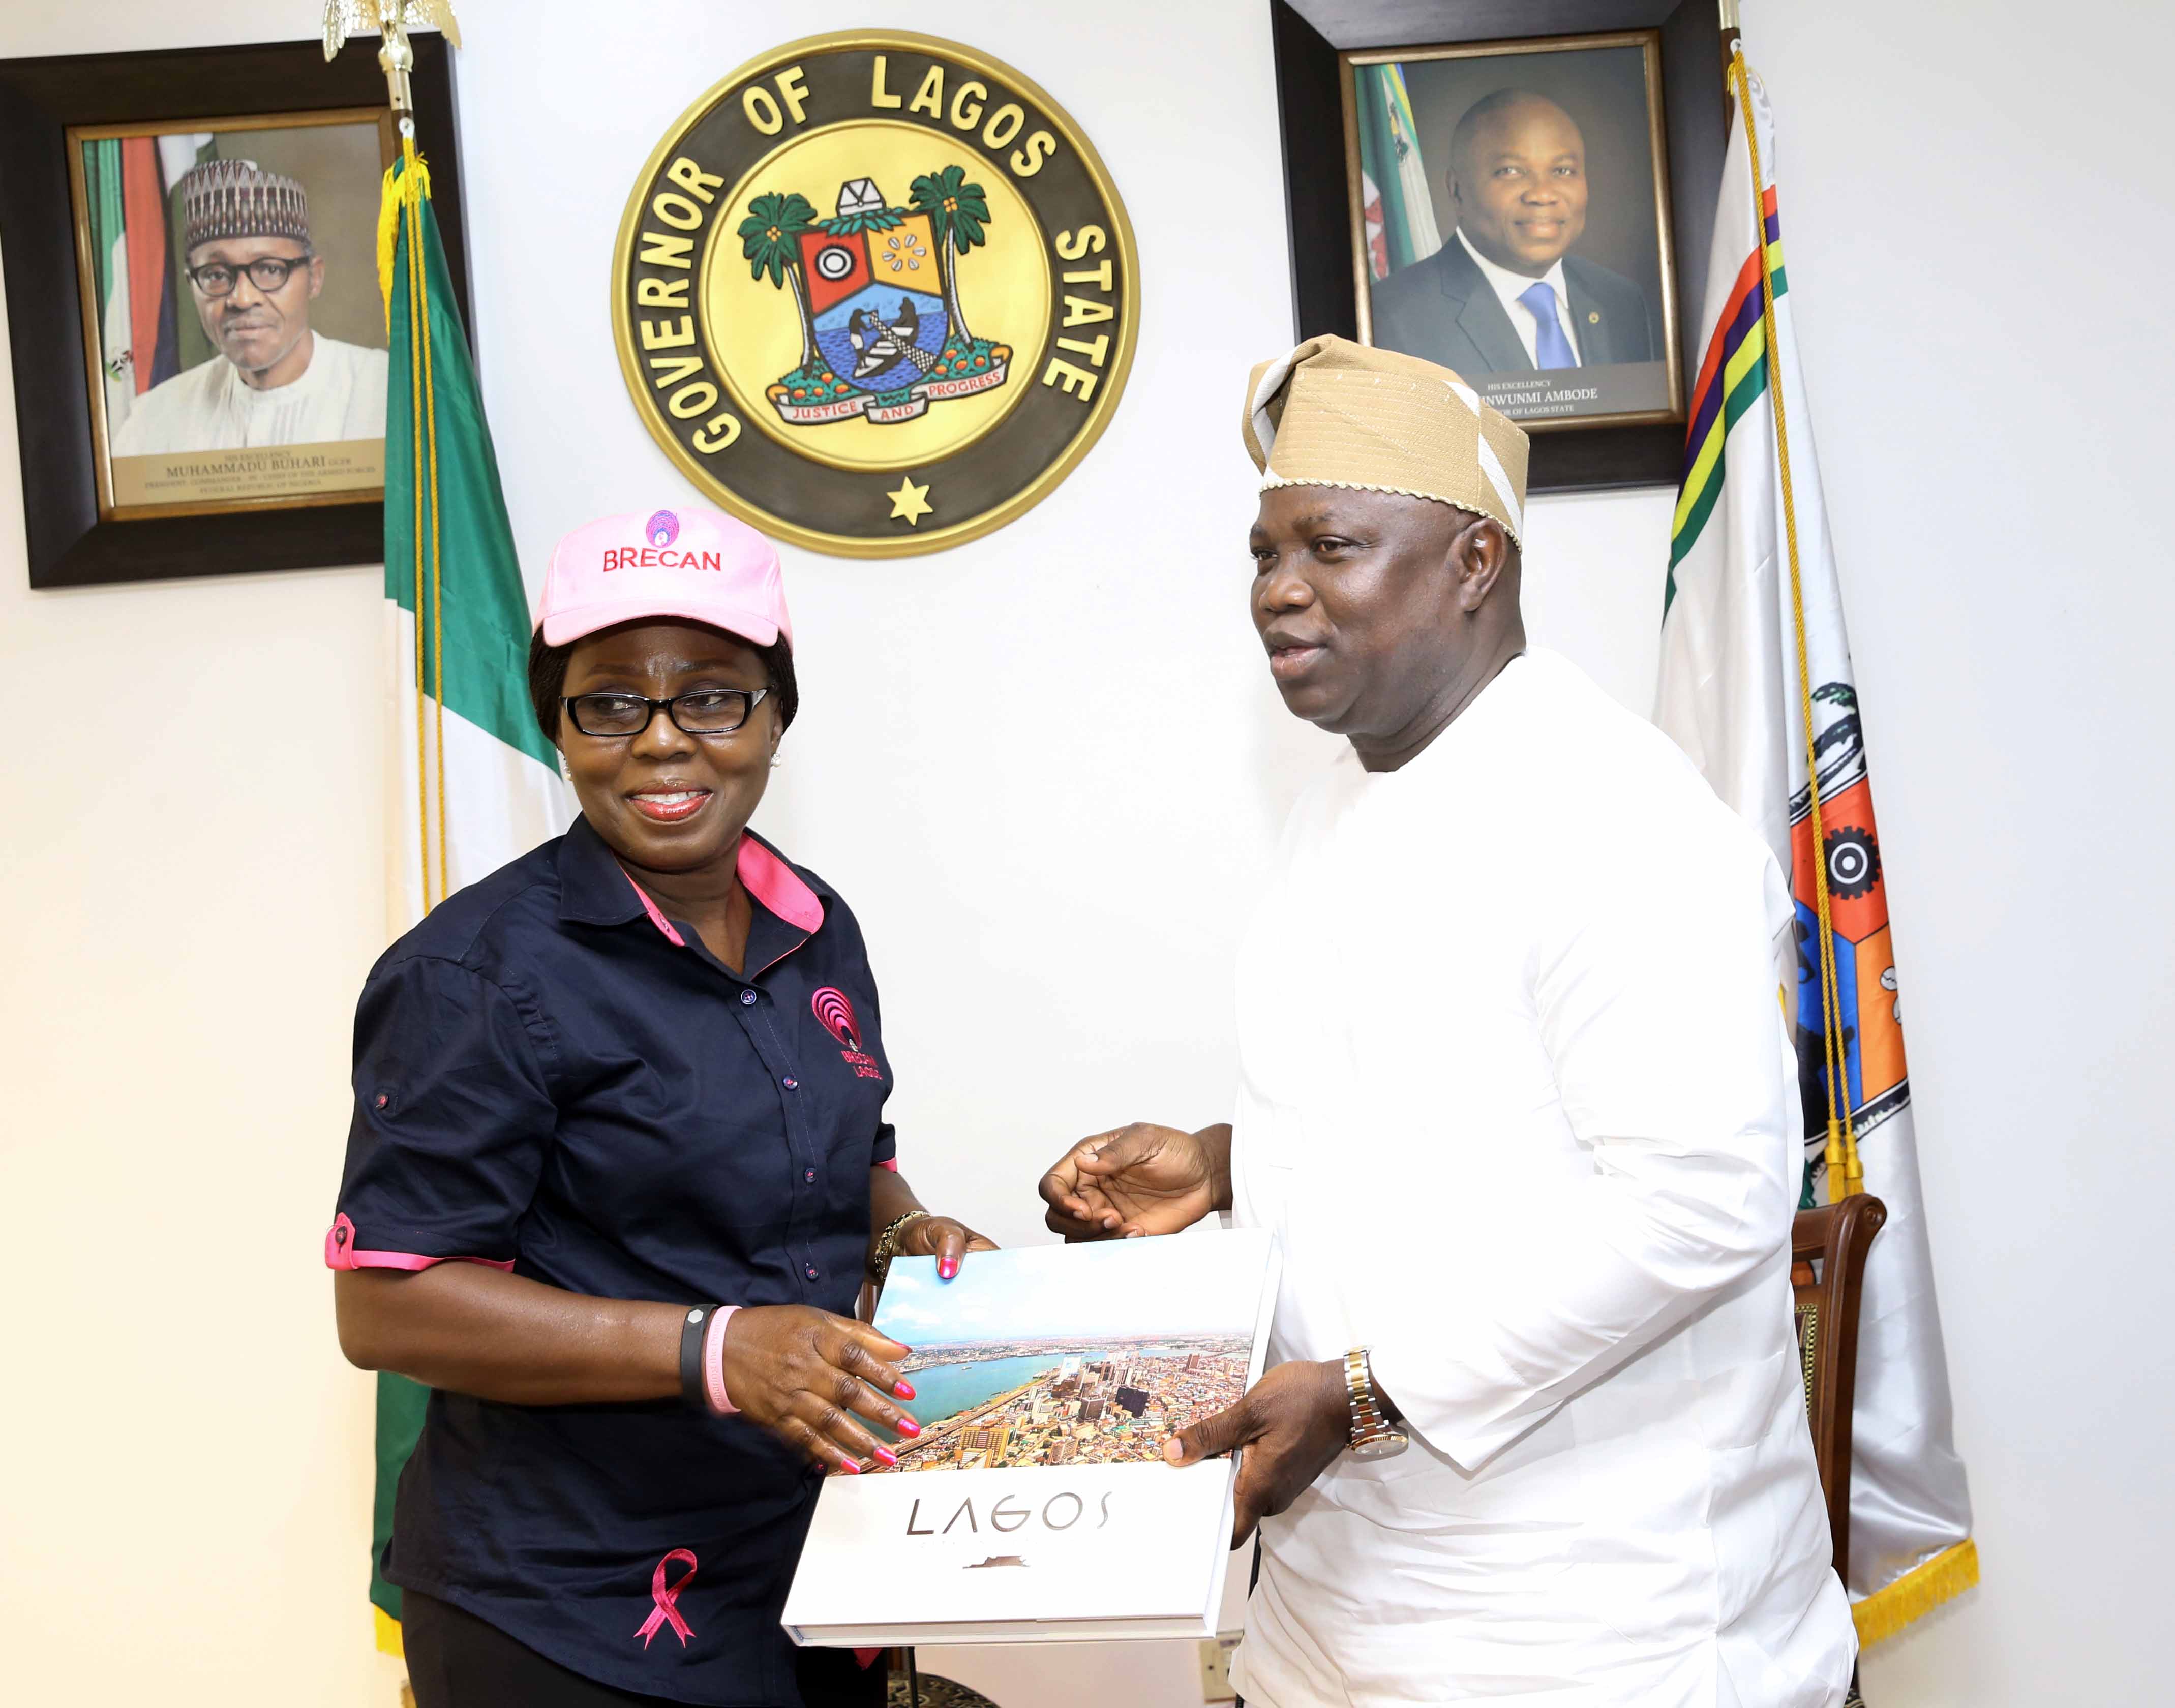  Lagos State Governor, Mr. Akinwunmi Ambode (right), presents a souvenir to the First Lady Of Ondo State, Mrs. Betty Anyanwu-Akeredolu during a courtesy visit by the First Lady and members of Breast Cancer Association of Nigeria (BRECAN), at the Lagos House, Ikeja, on Thursday, September 21, 2017.